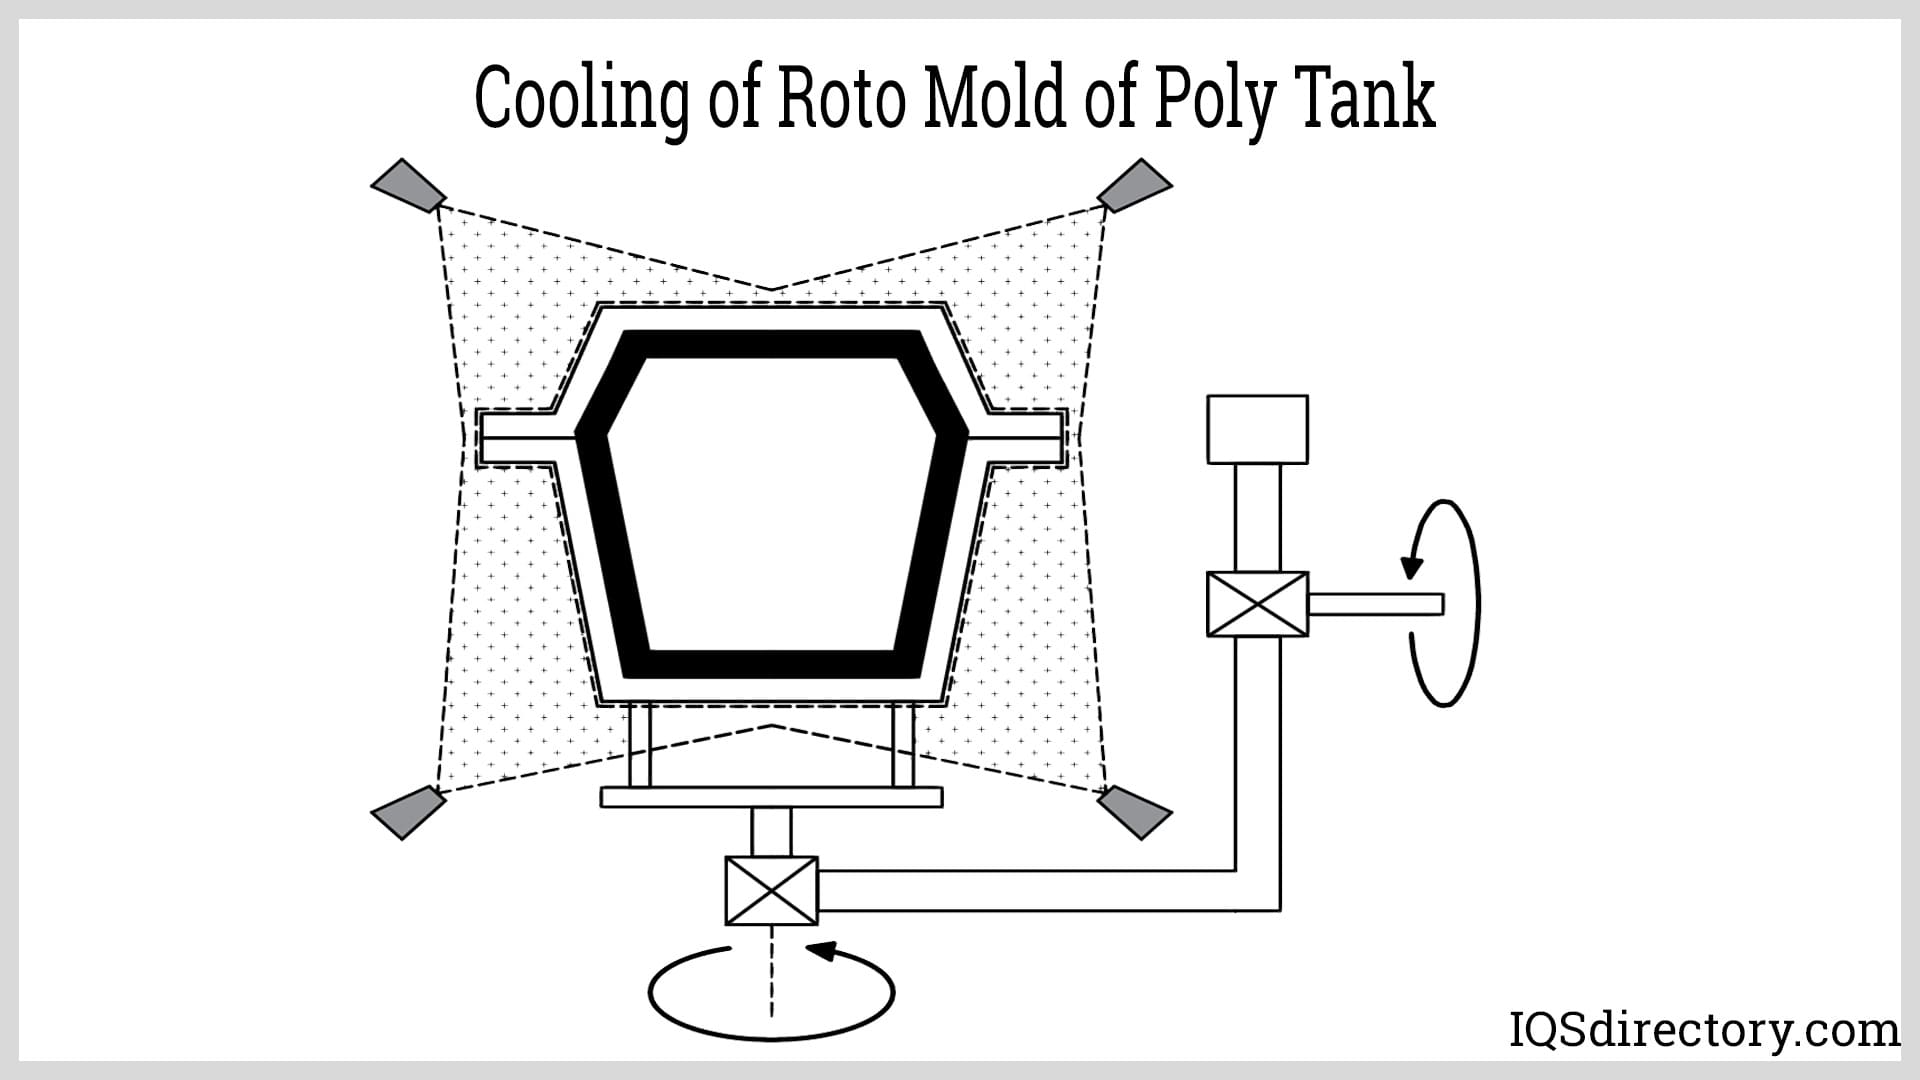 Cooling of Roto Mold of Poly Tank